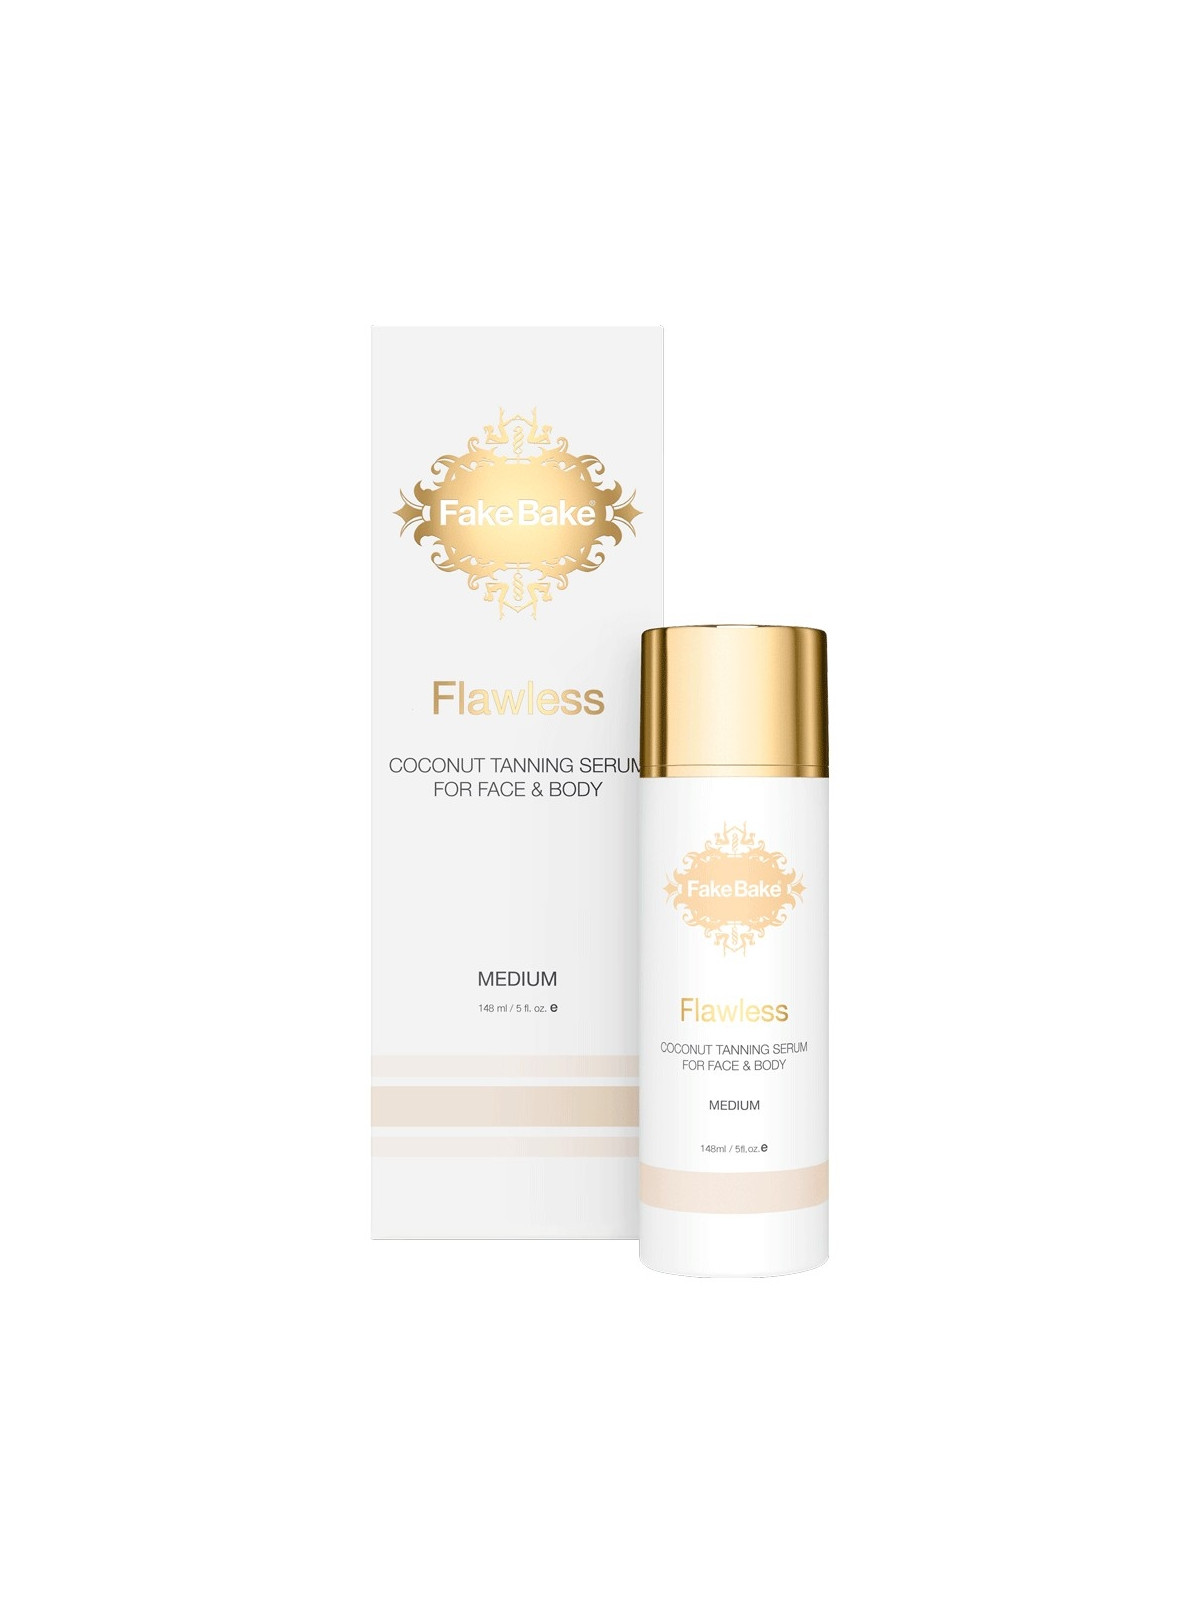 Fake Bake Flawless Coconut Tanning Serum for Face and Body